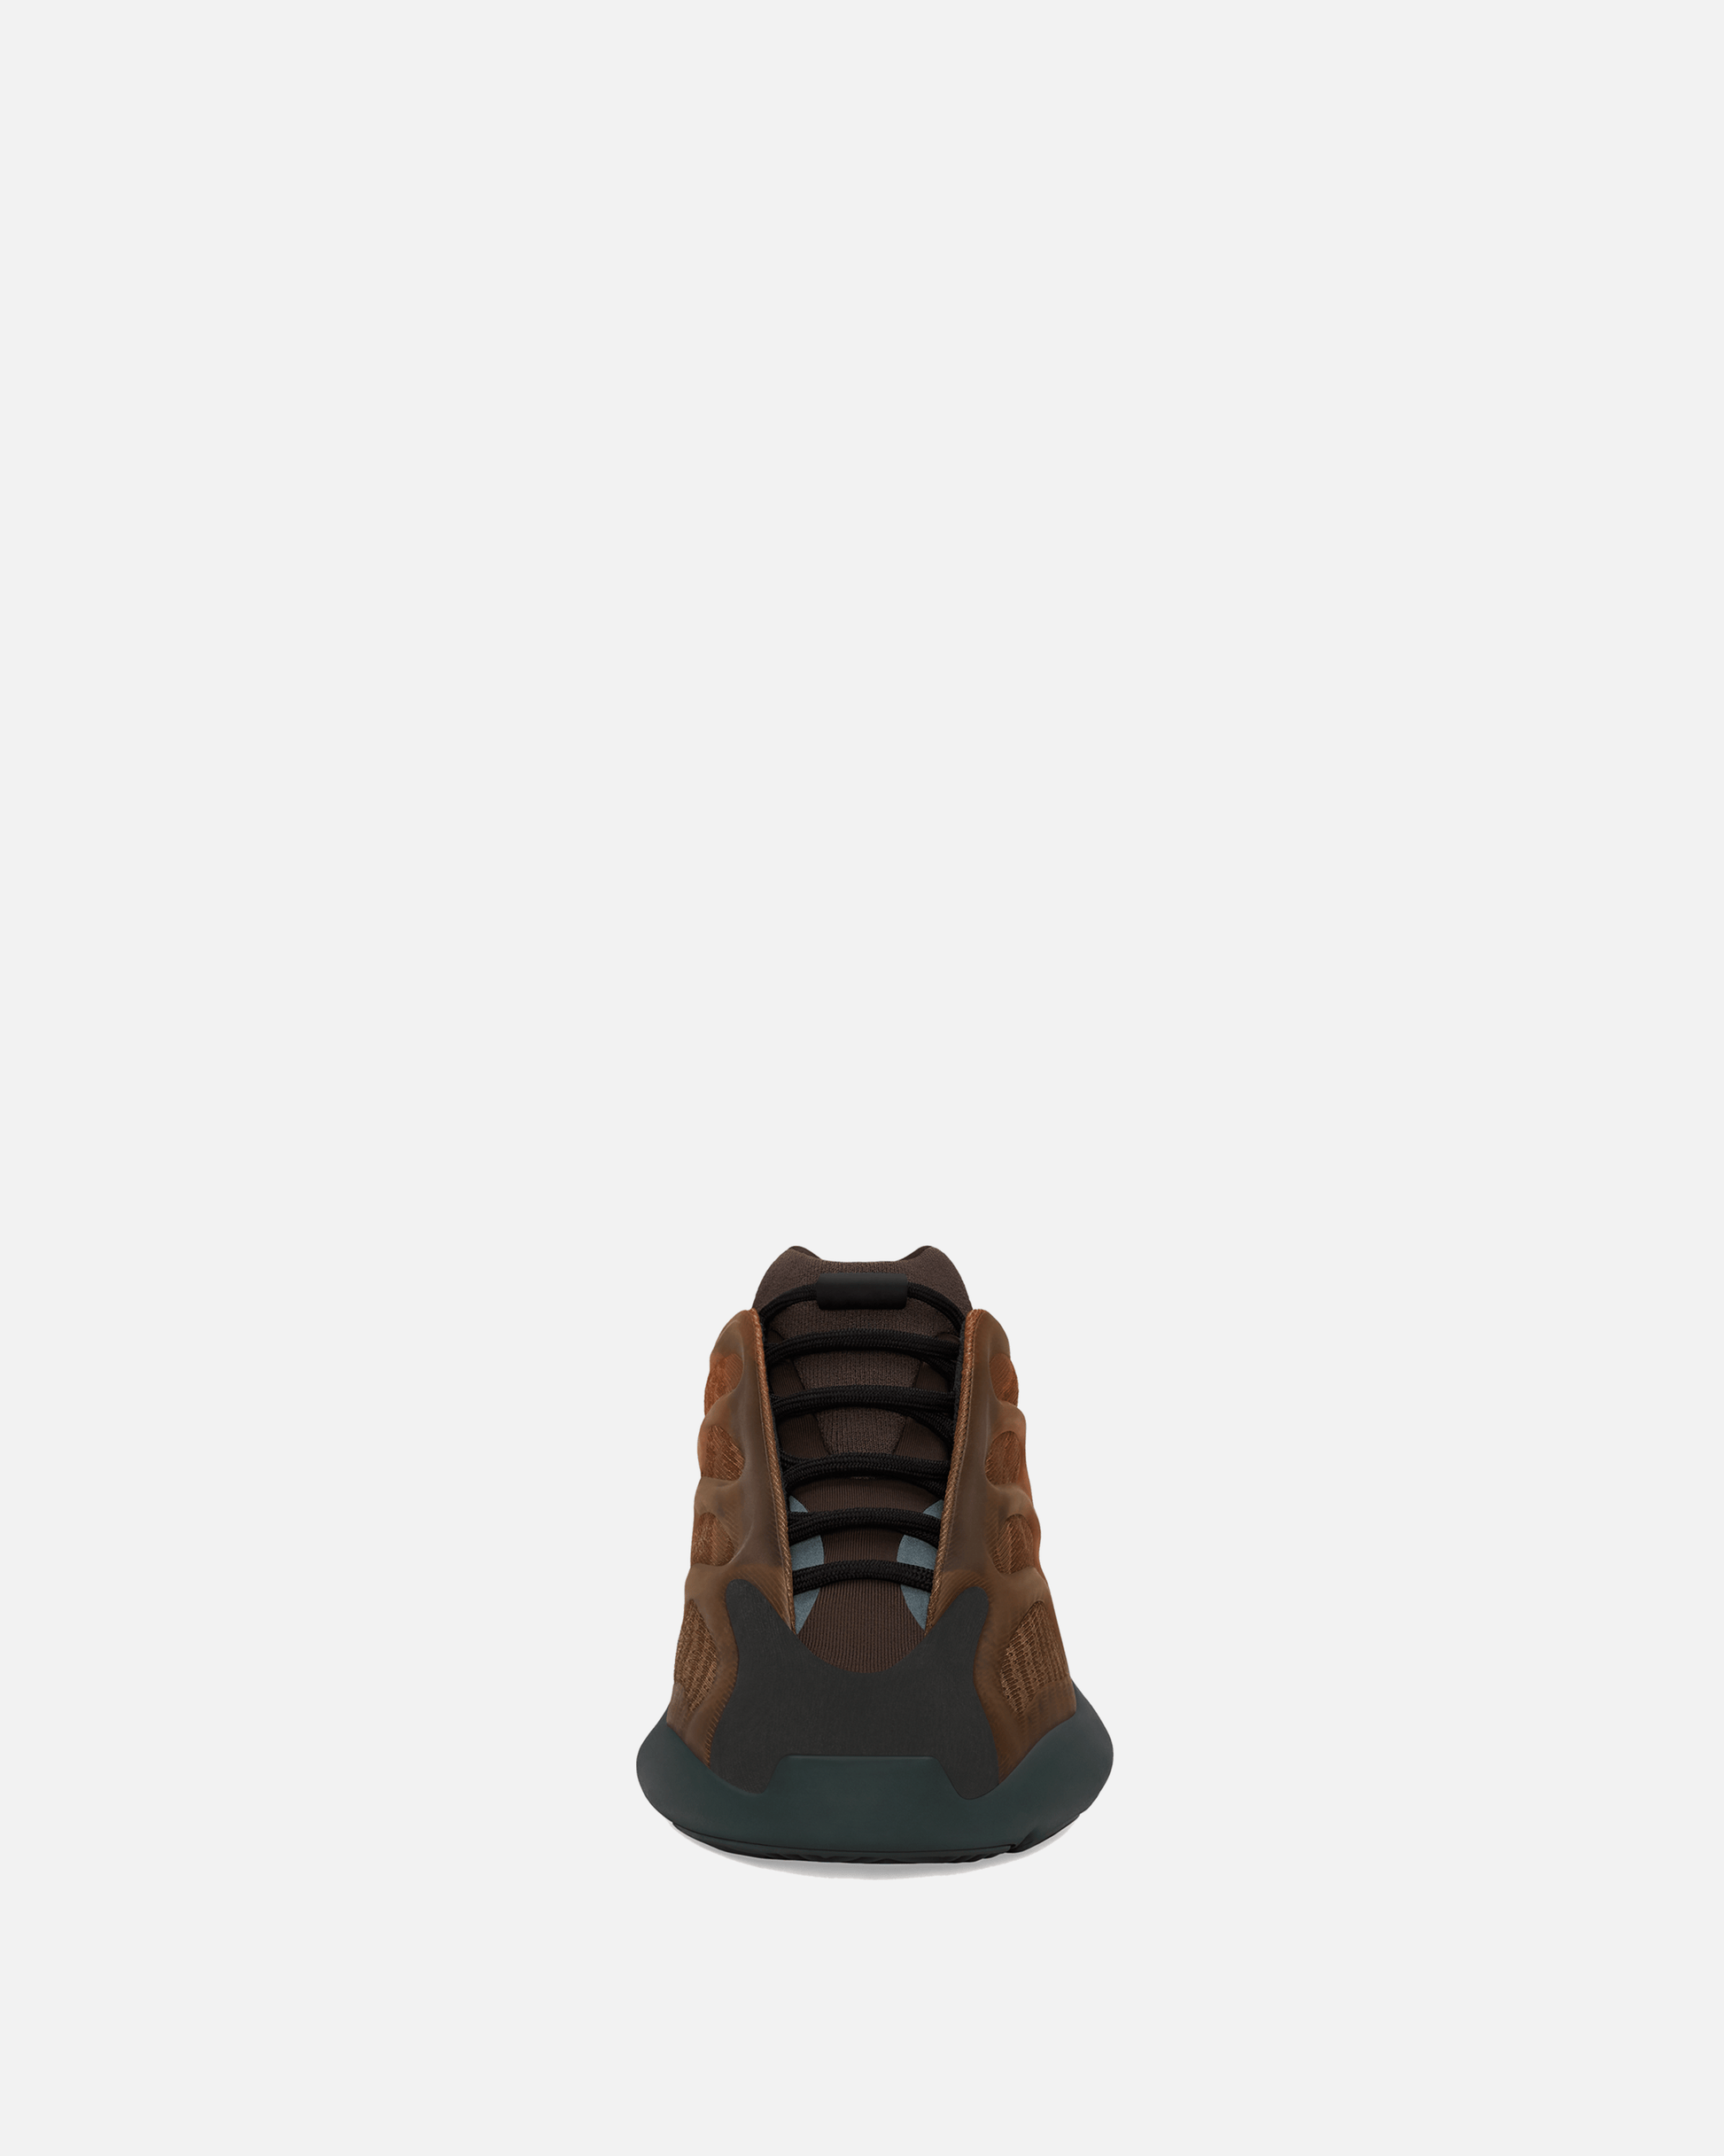 Adidas Releases Yeezy 700 V3 'Copper Fade'